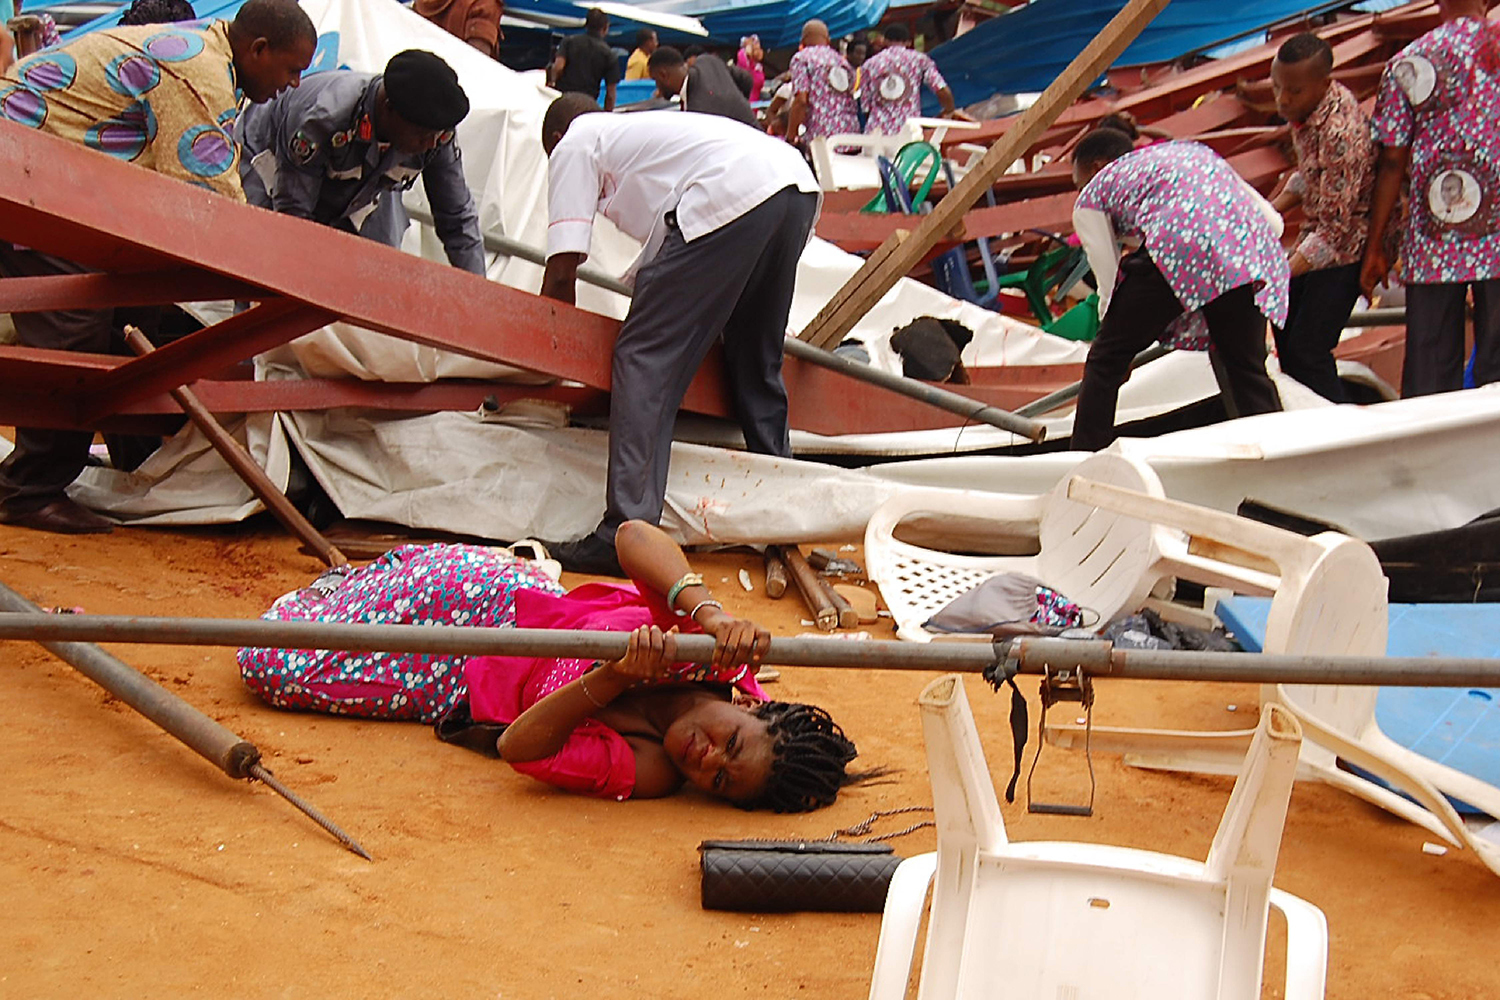 TOPSHOT - This picture taken on December 10, 2016 shows a woman stuck under a scaffolding bar amid rubbles at the scene after an evengelical church roof collapsed on worshippers in the remote southeastern city of Uyo, the capital of Akwa Ibom state. The search for survivors continued after a church roof collapsed killing at least 60 people, with many more feared dead. / AFP PHOTO / STRINGER / TT / kod 444